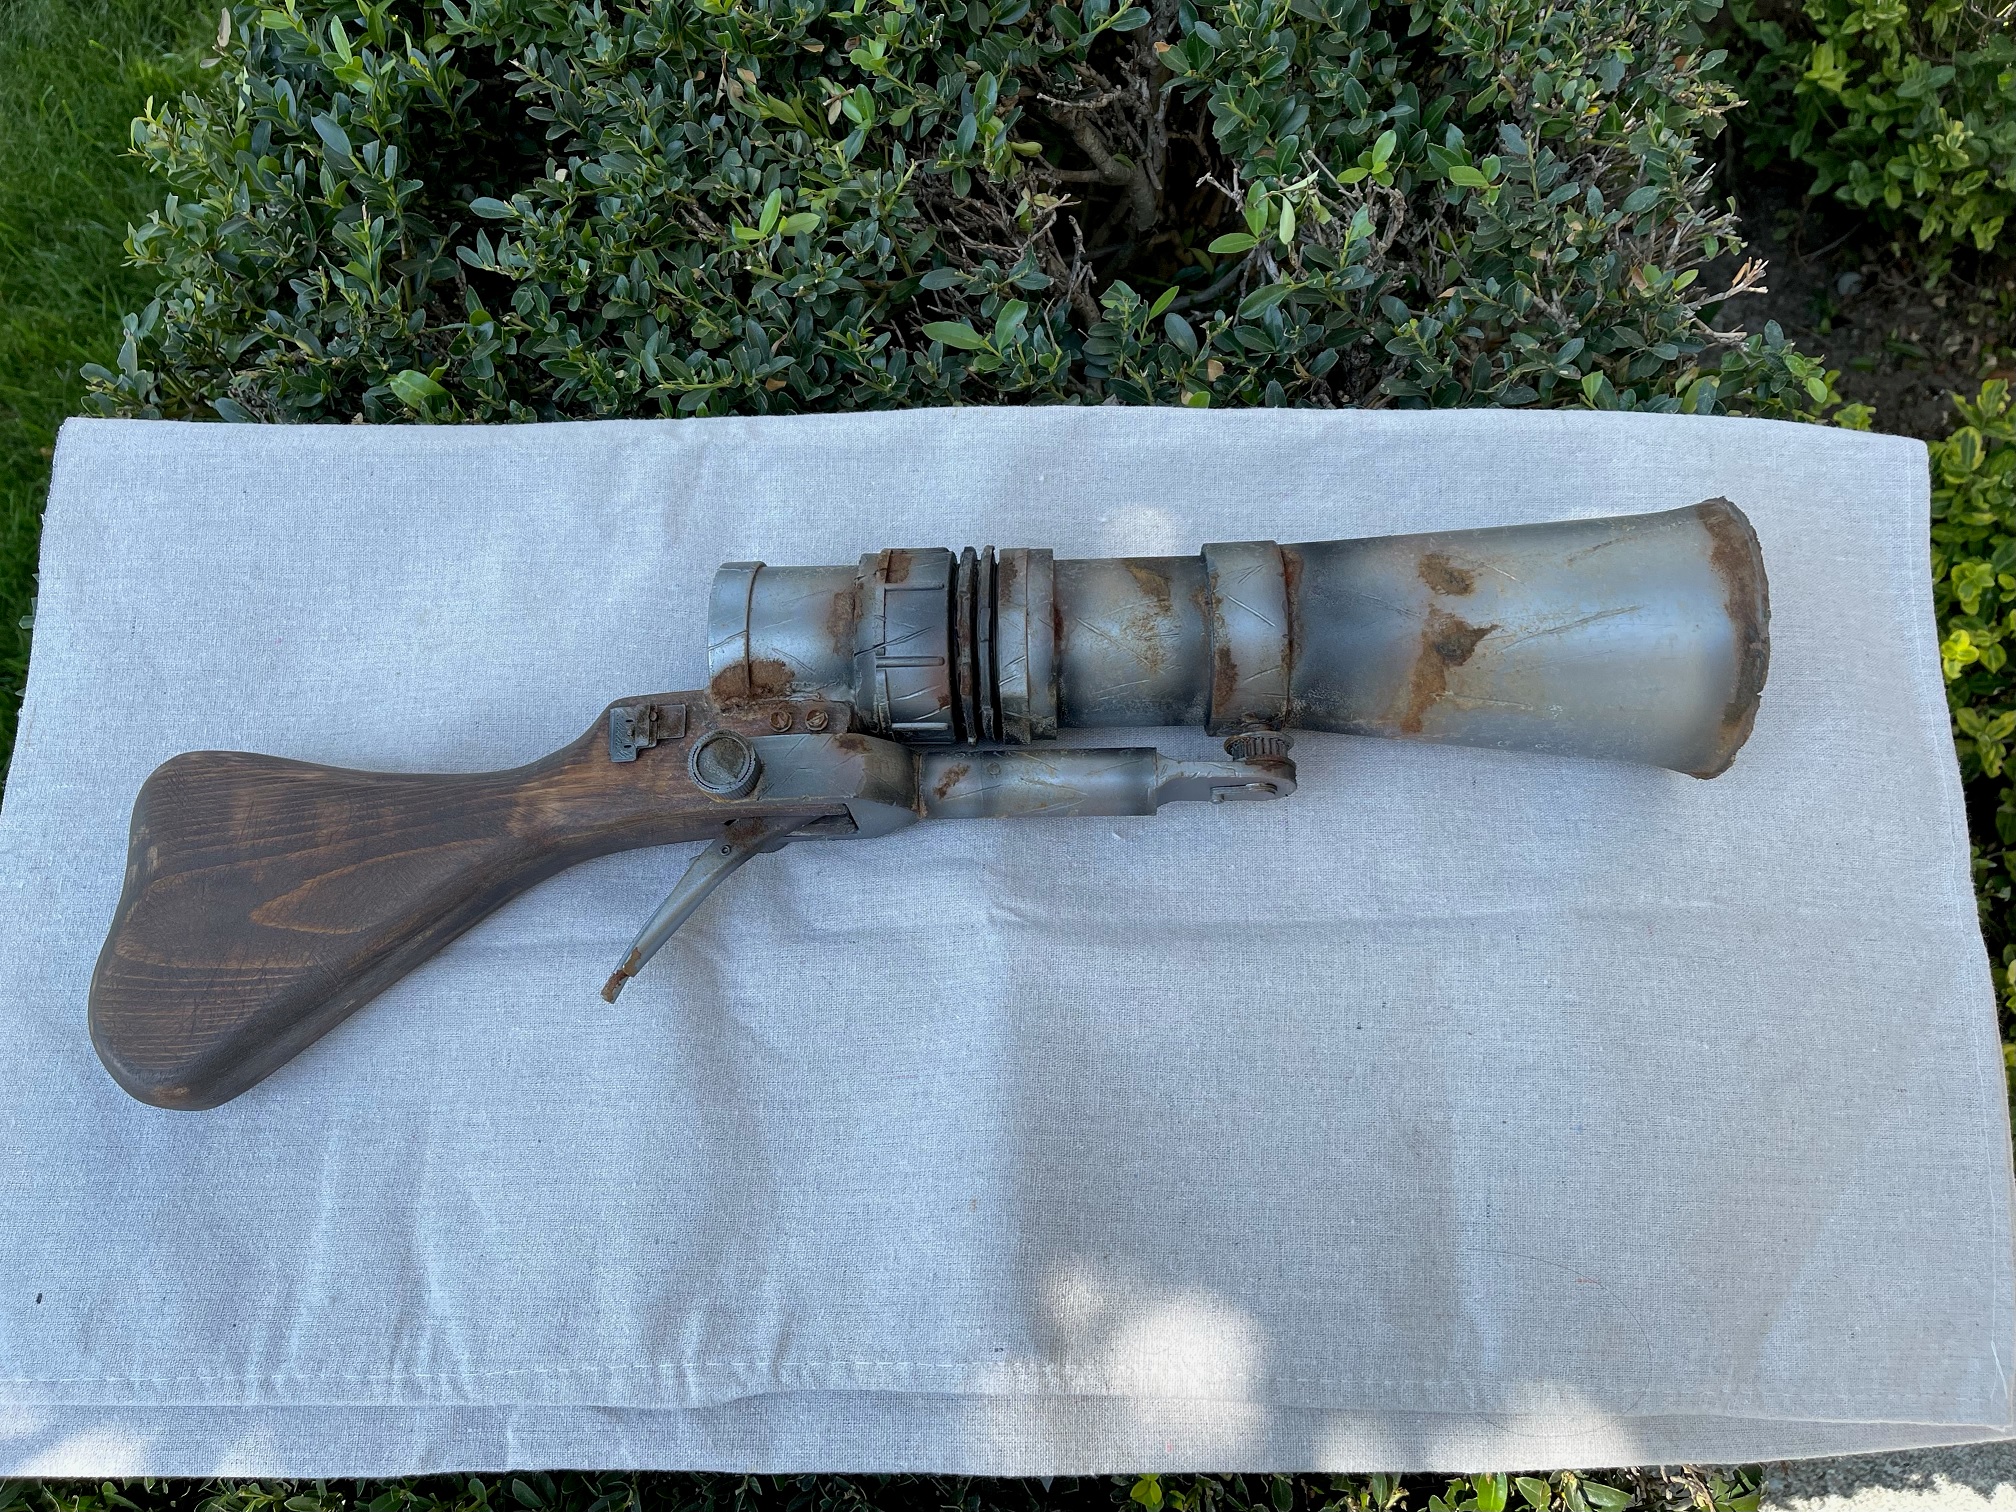 Jawa - ION Rifle - Finished with Rust - Pic 2.jpg